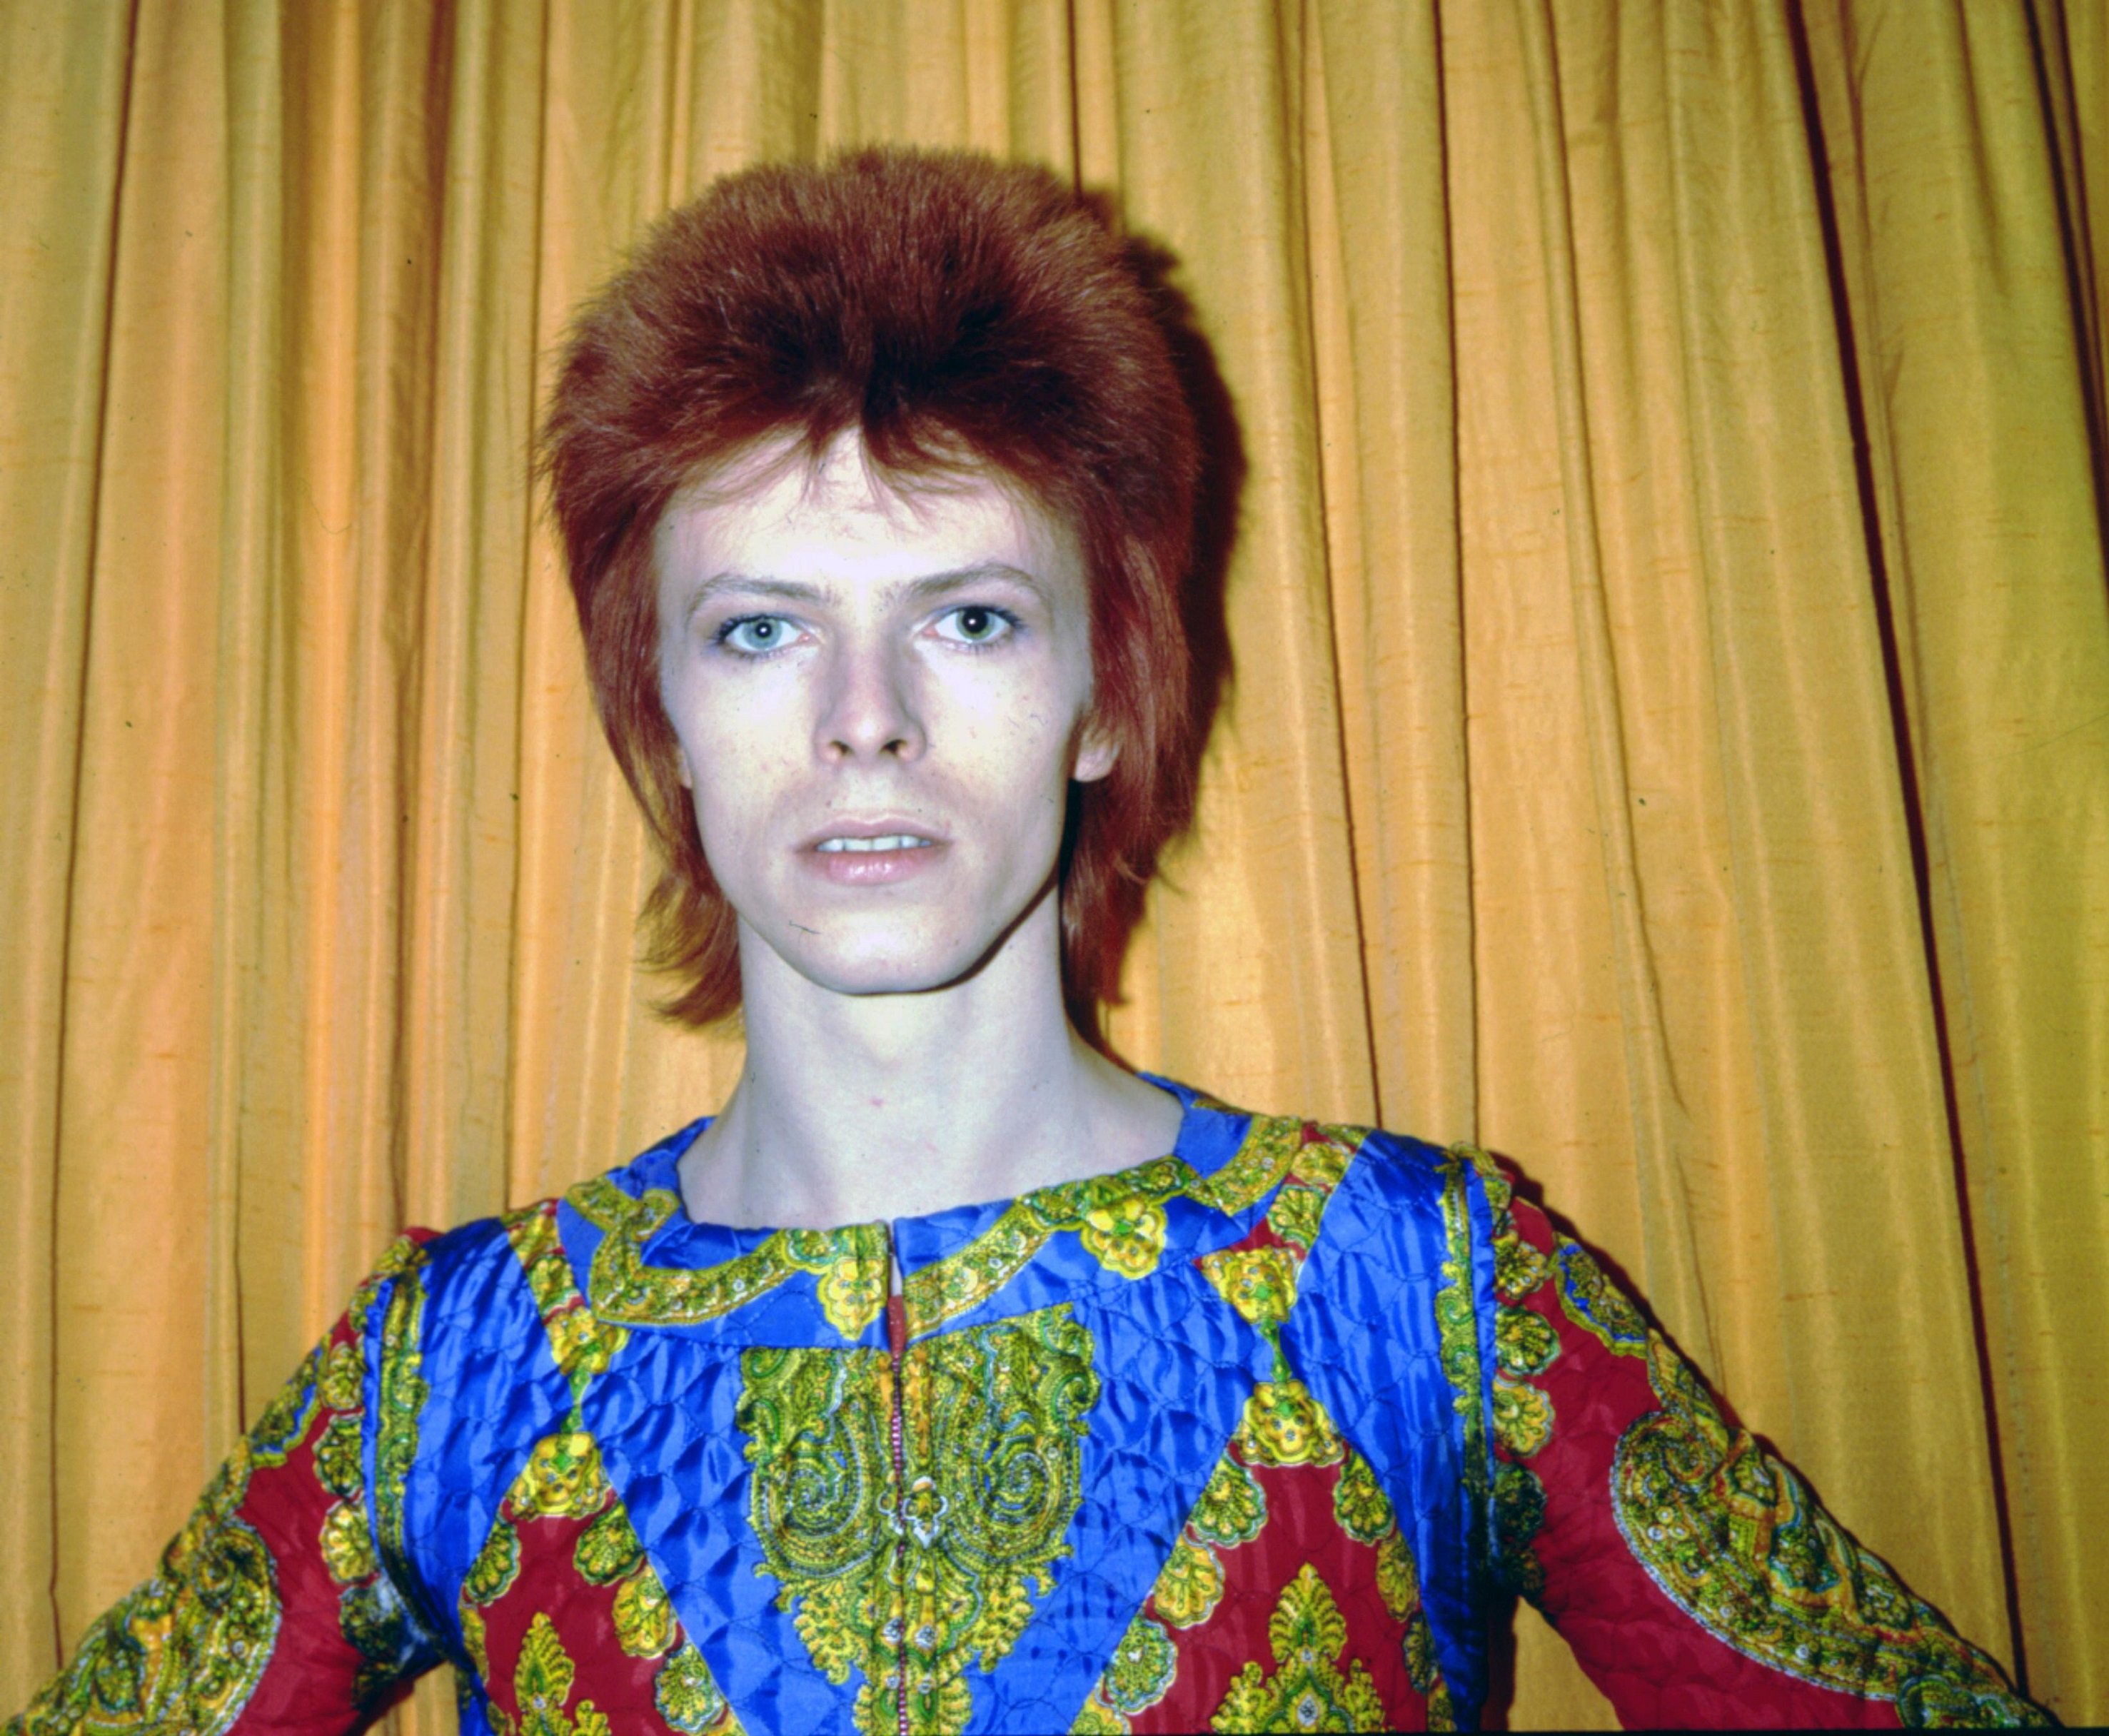 David Bowie dressed as Ziggy Stardust and standing in front of a curtain